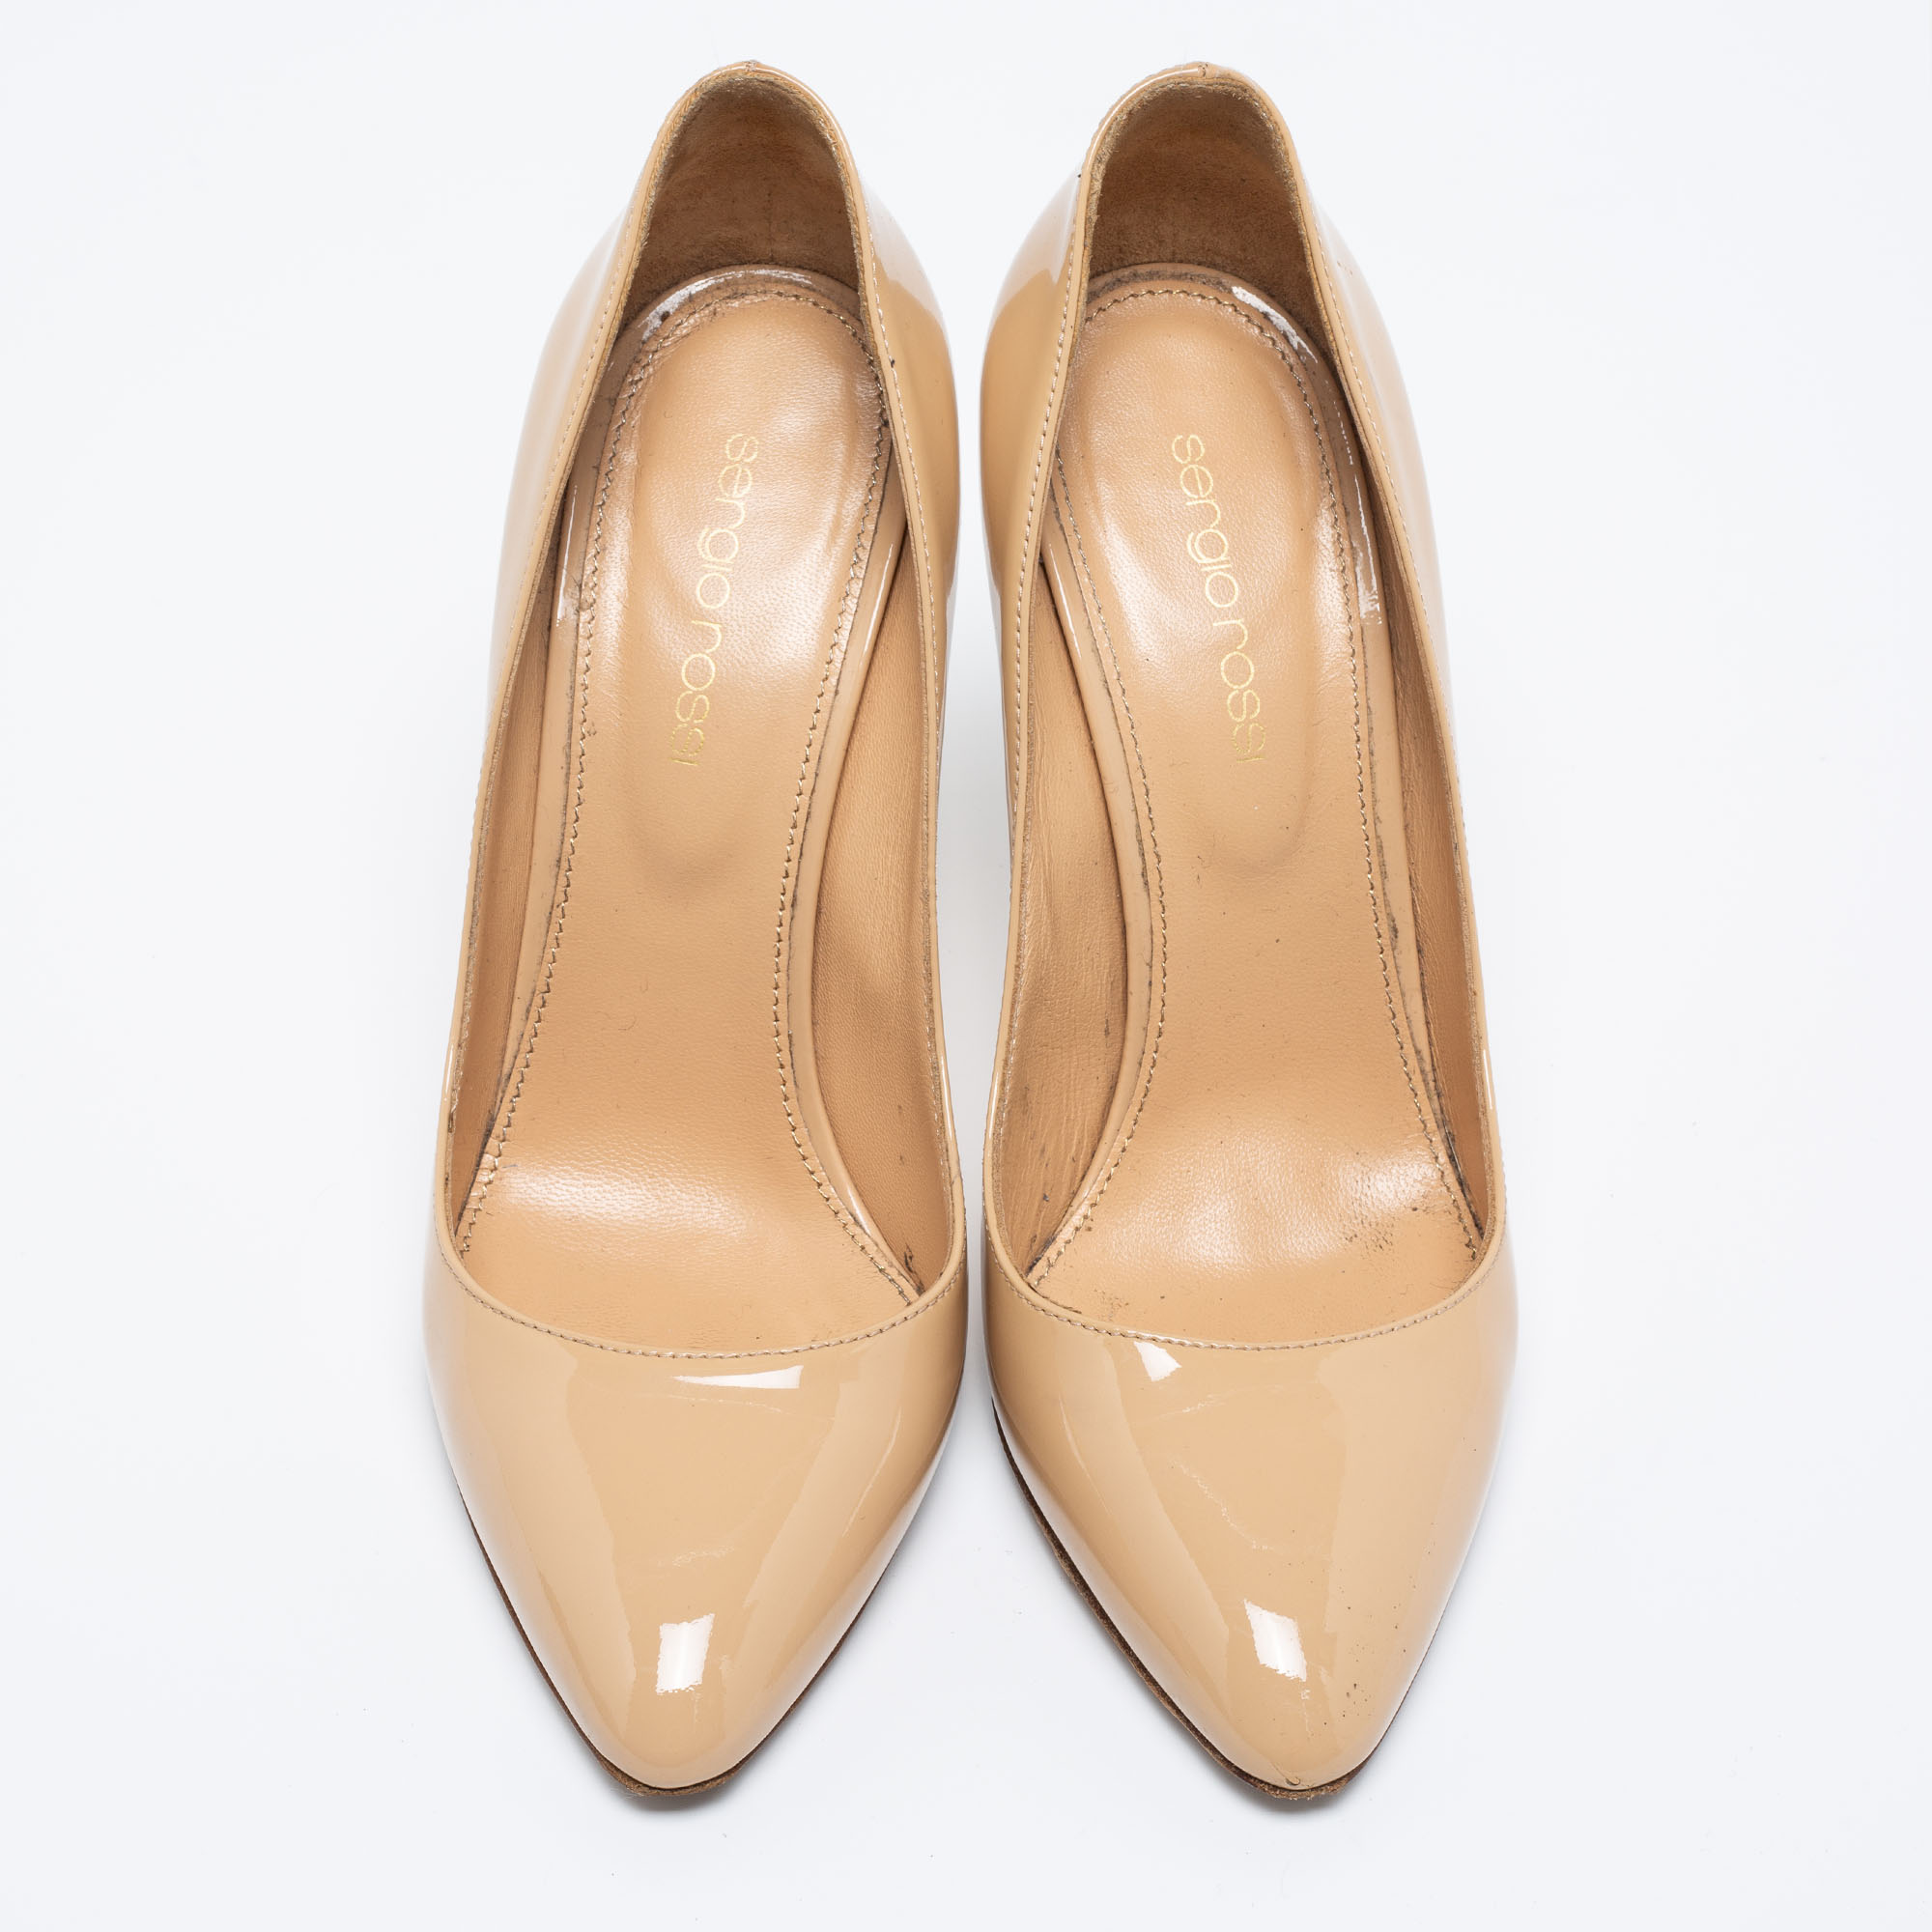 Sergio Rossi Beige Patent Leather Pointed-Toe Pumps Size 37